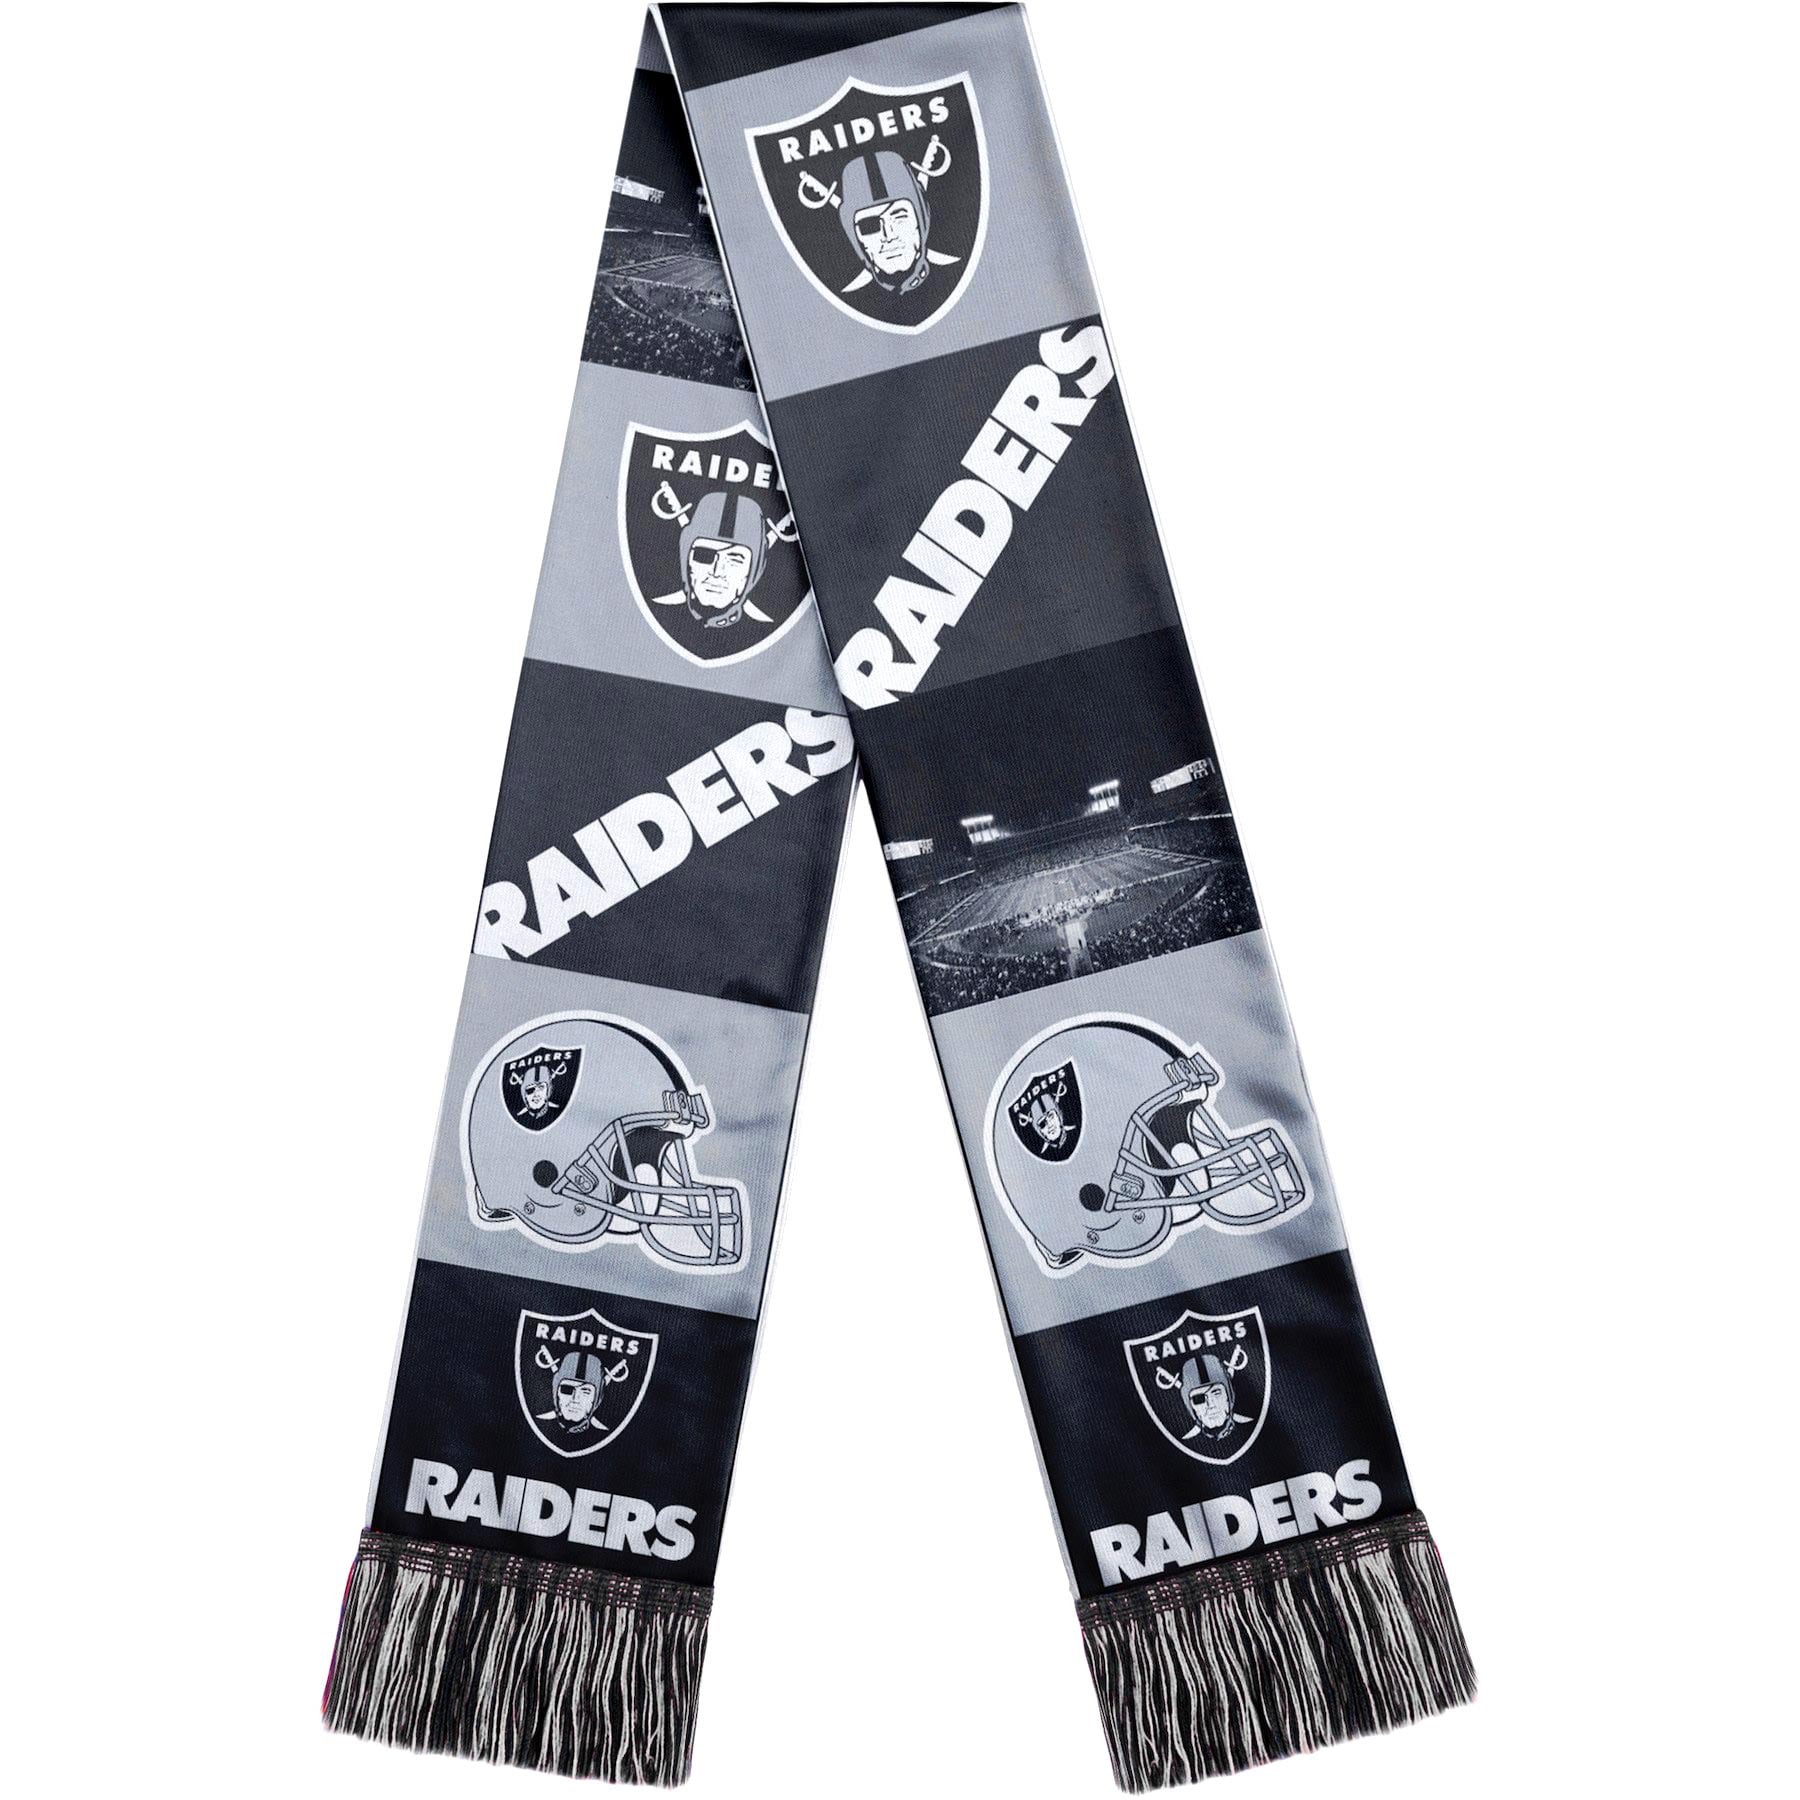 oakland raiders collectibles